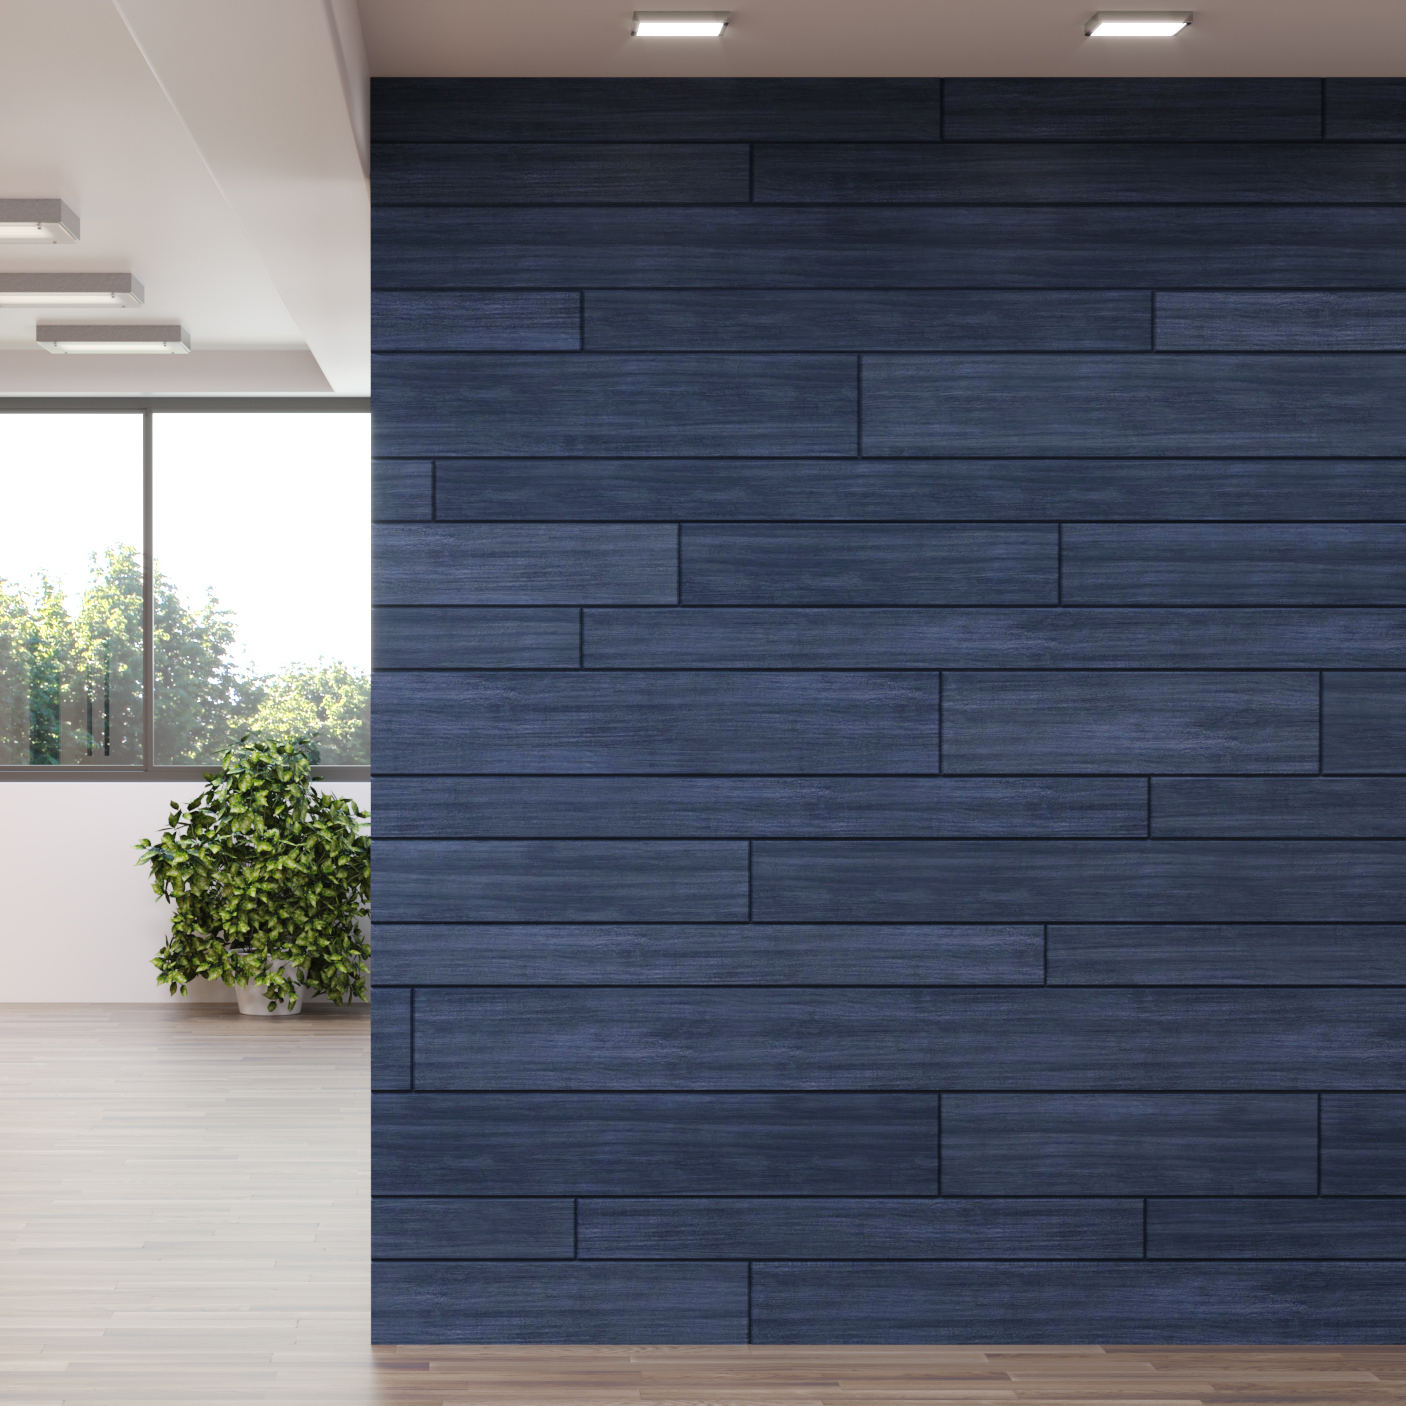 sound-absorbing tiles with a blue wood grain print on a wall